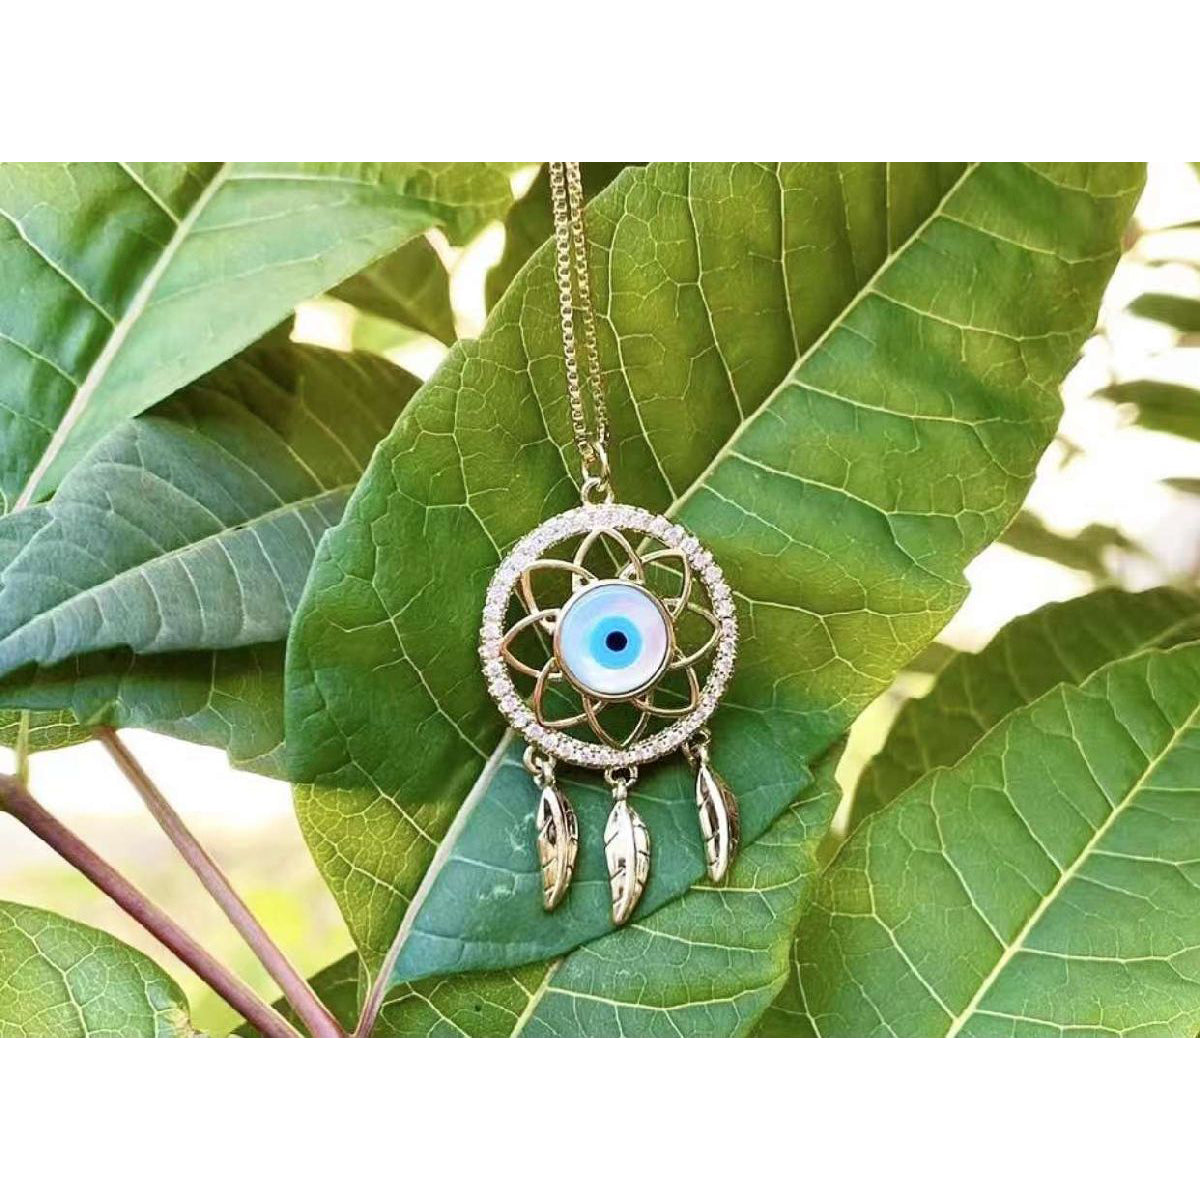 Dreamcatcher Pendant Necklace Turquoise Crystal Bead Sterling Silver native  american style Jewellery